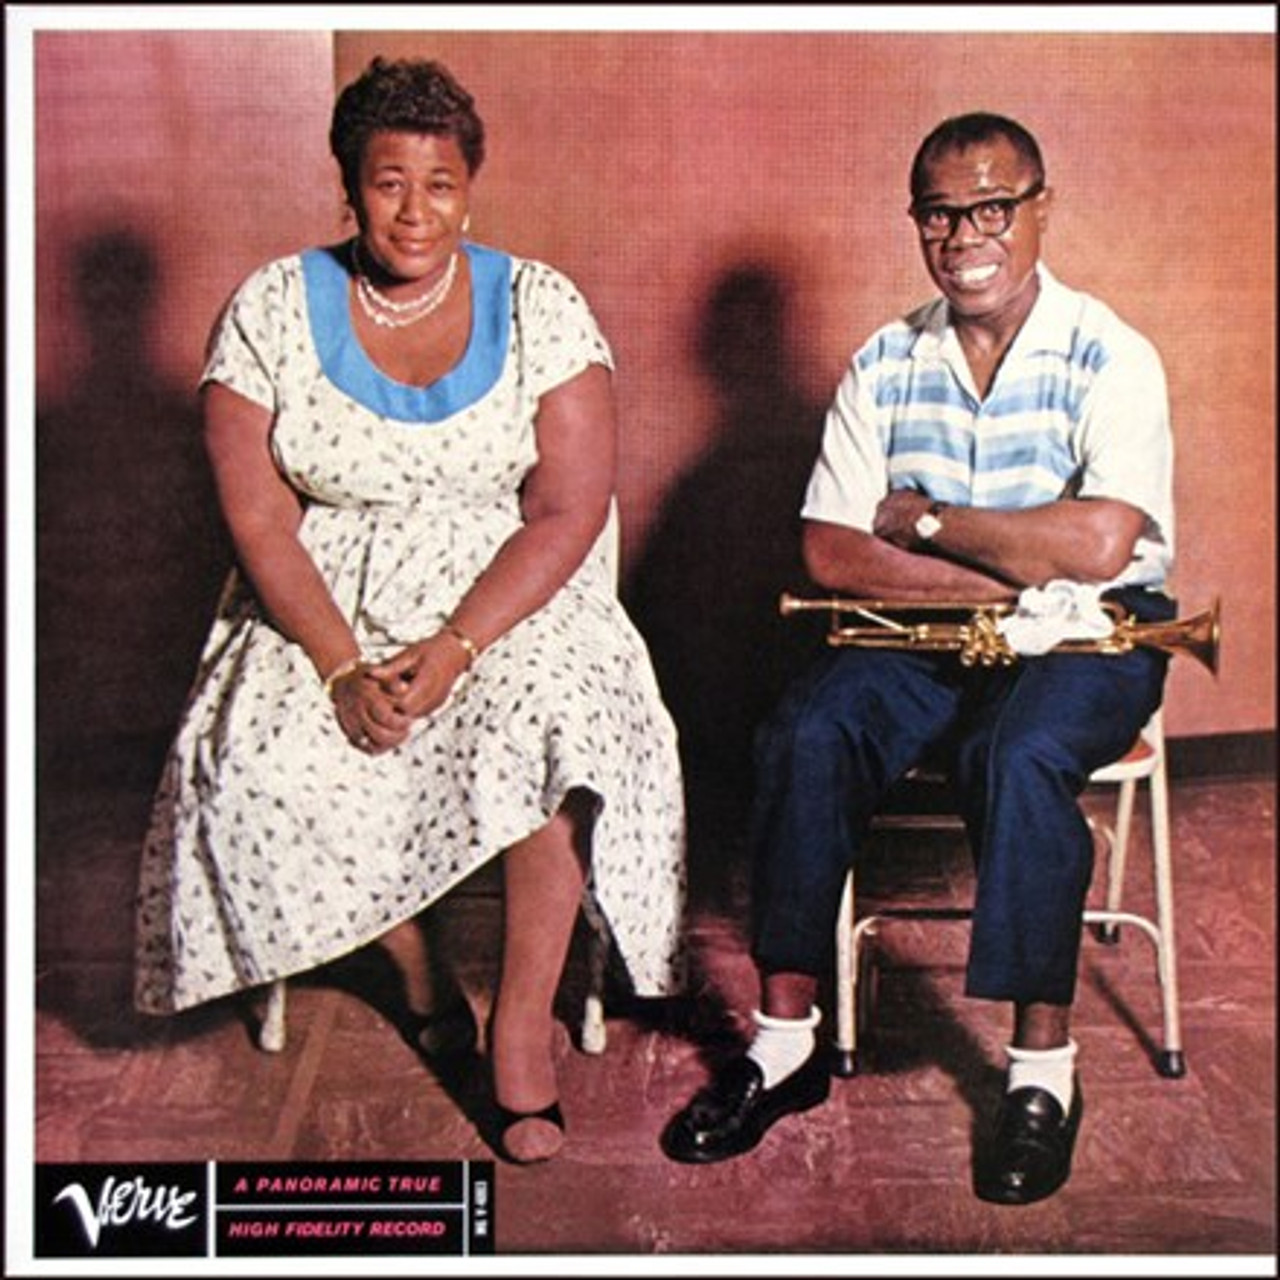 Ella Fitzgerald and Louis Armstrong - Ella and Louis (180g Import Vinyl LP)  * * * - Music Direct